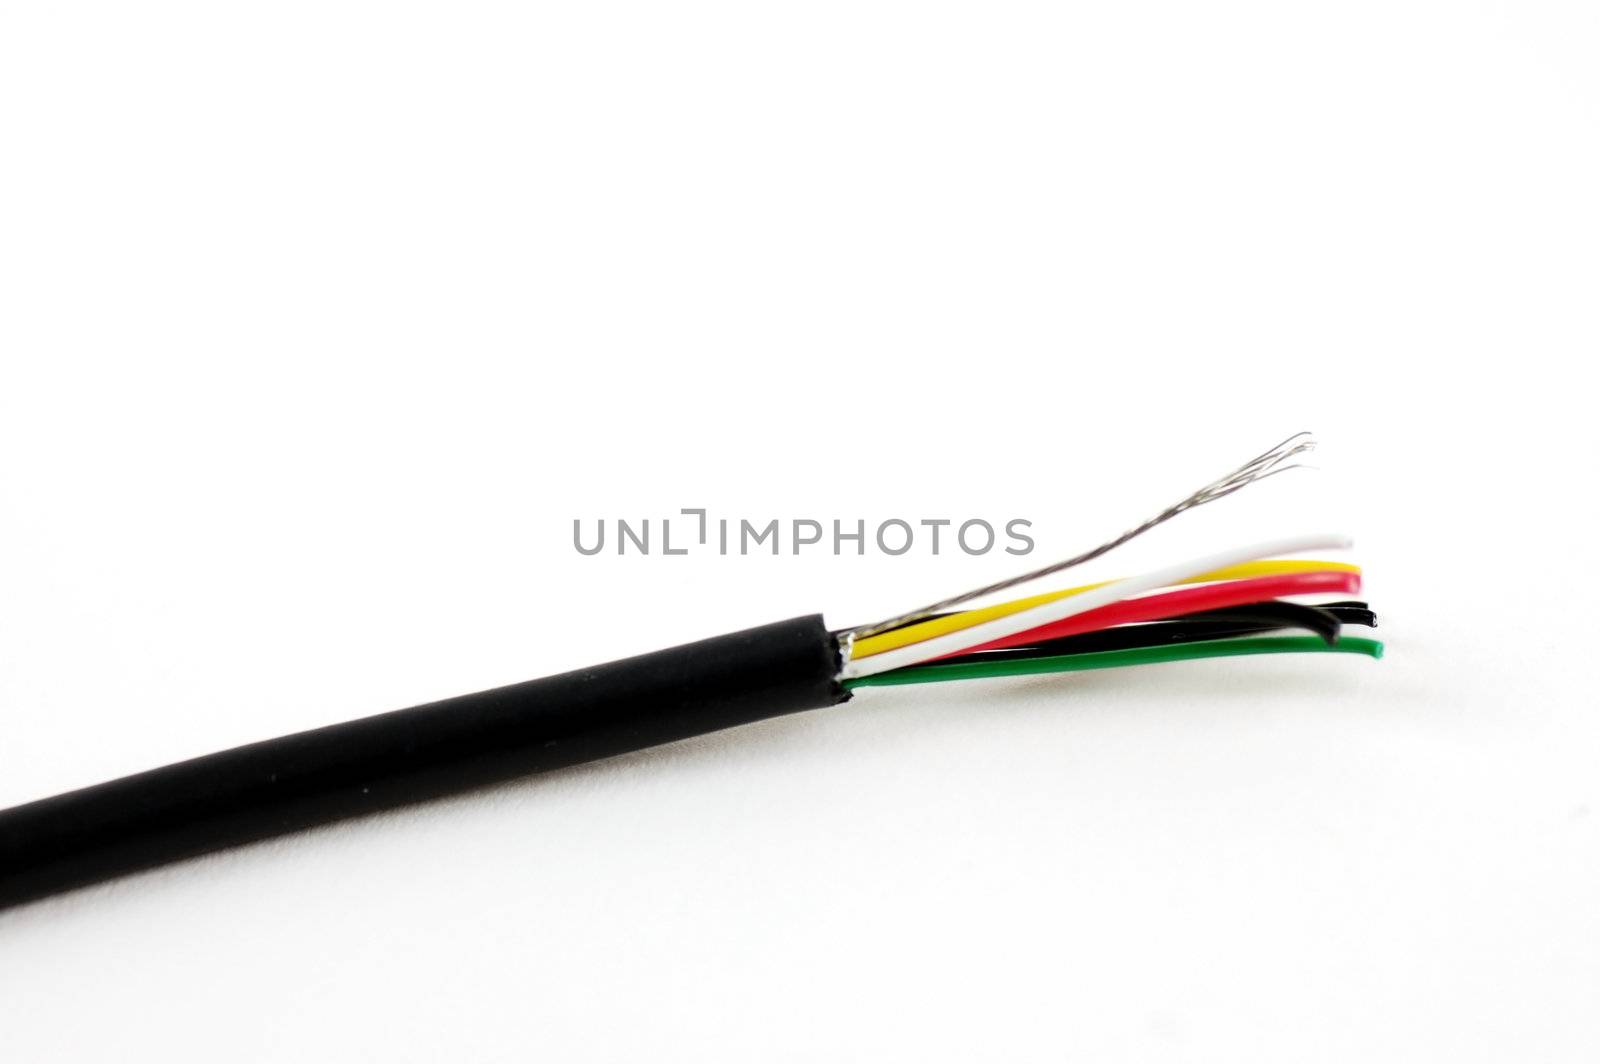 stock pictures of wires and connectors for electrical signals